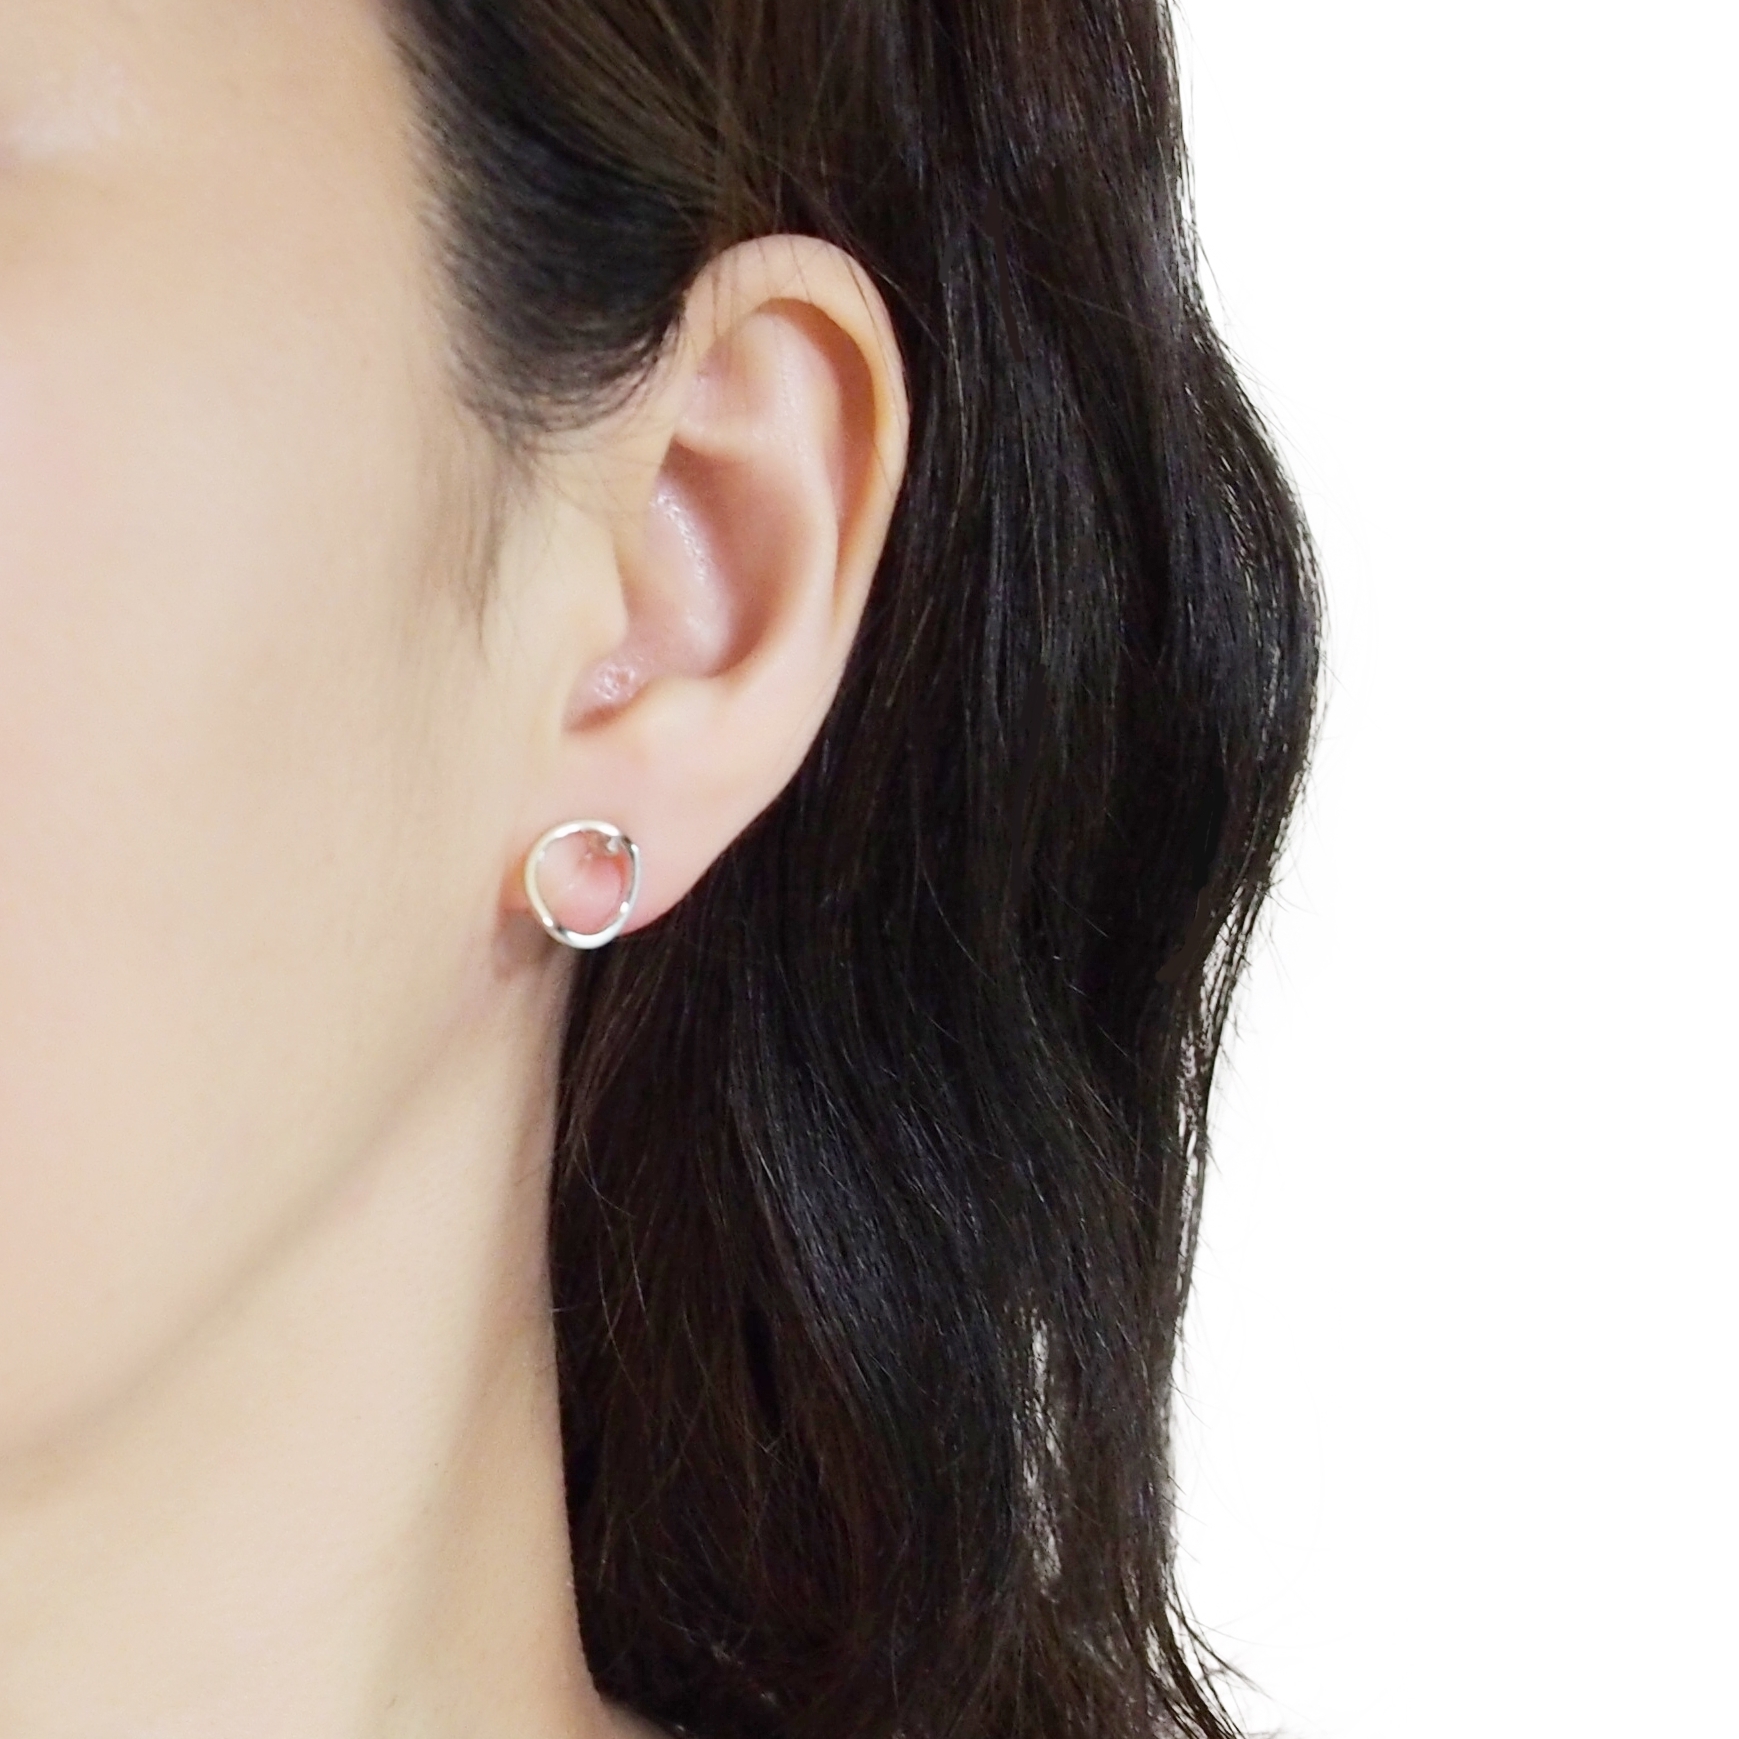 Comfortable-pierced-look-Silver-Curved-Hoops-Circle-Round-Invisible-clip-on-stud-earrings-Miyabi-Grace (1).jpg